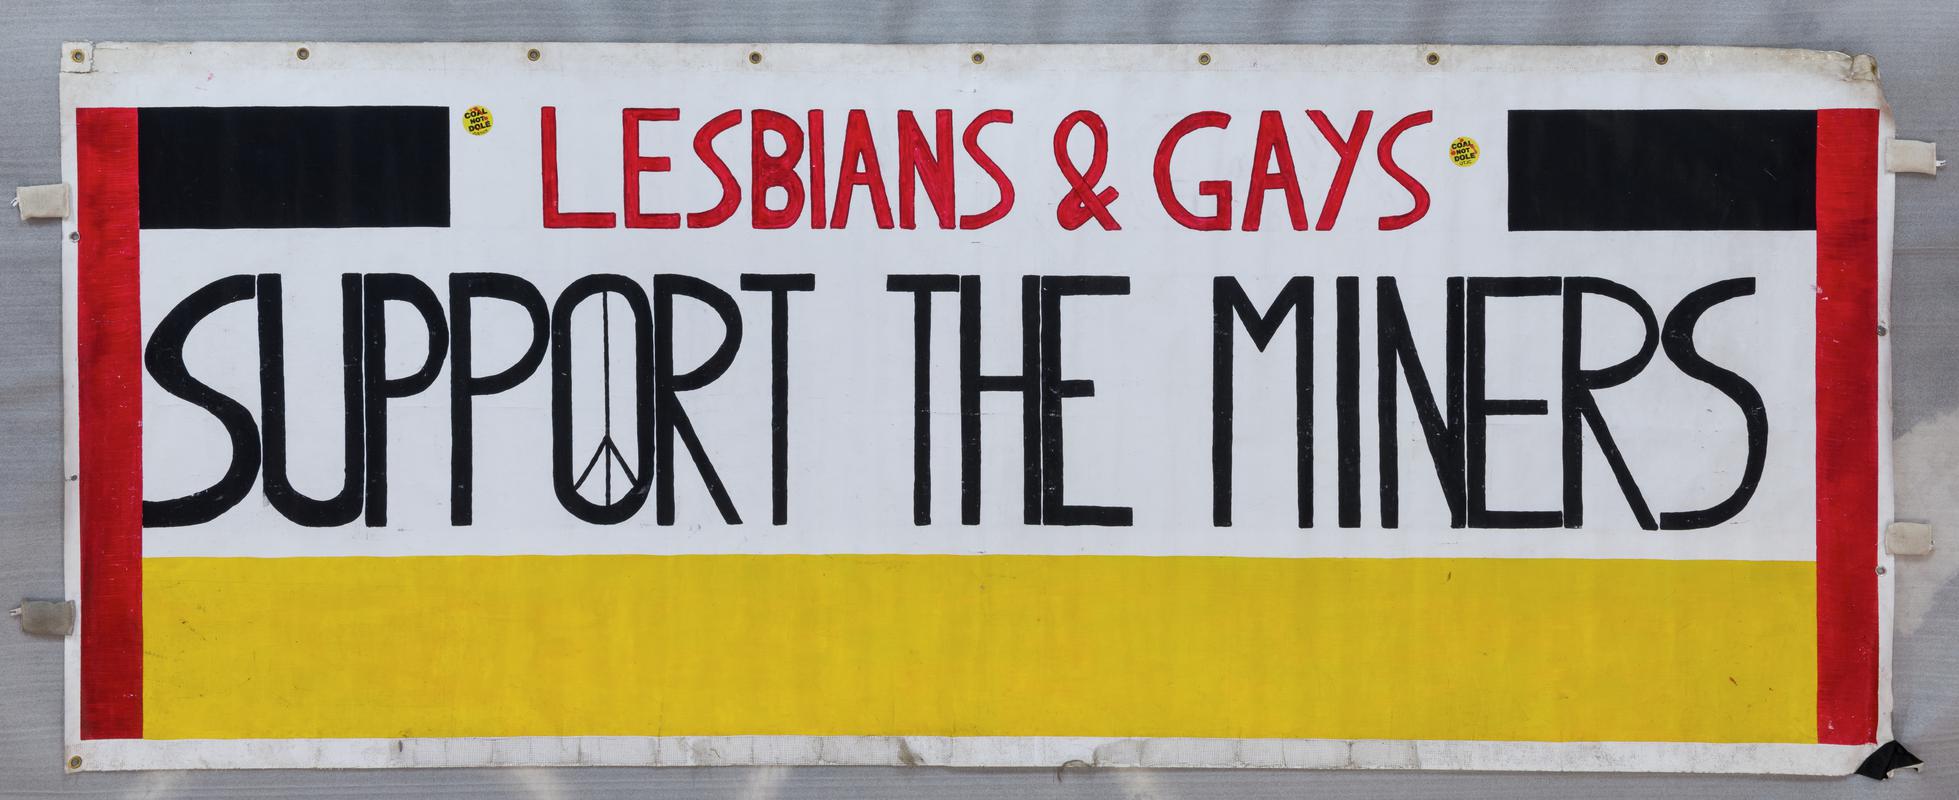 'Lesbians and Gays Support the Miners' banner made for the 2014 film 'Pride'.